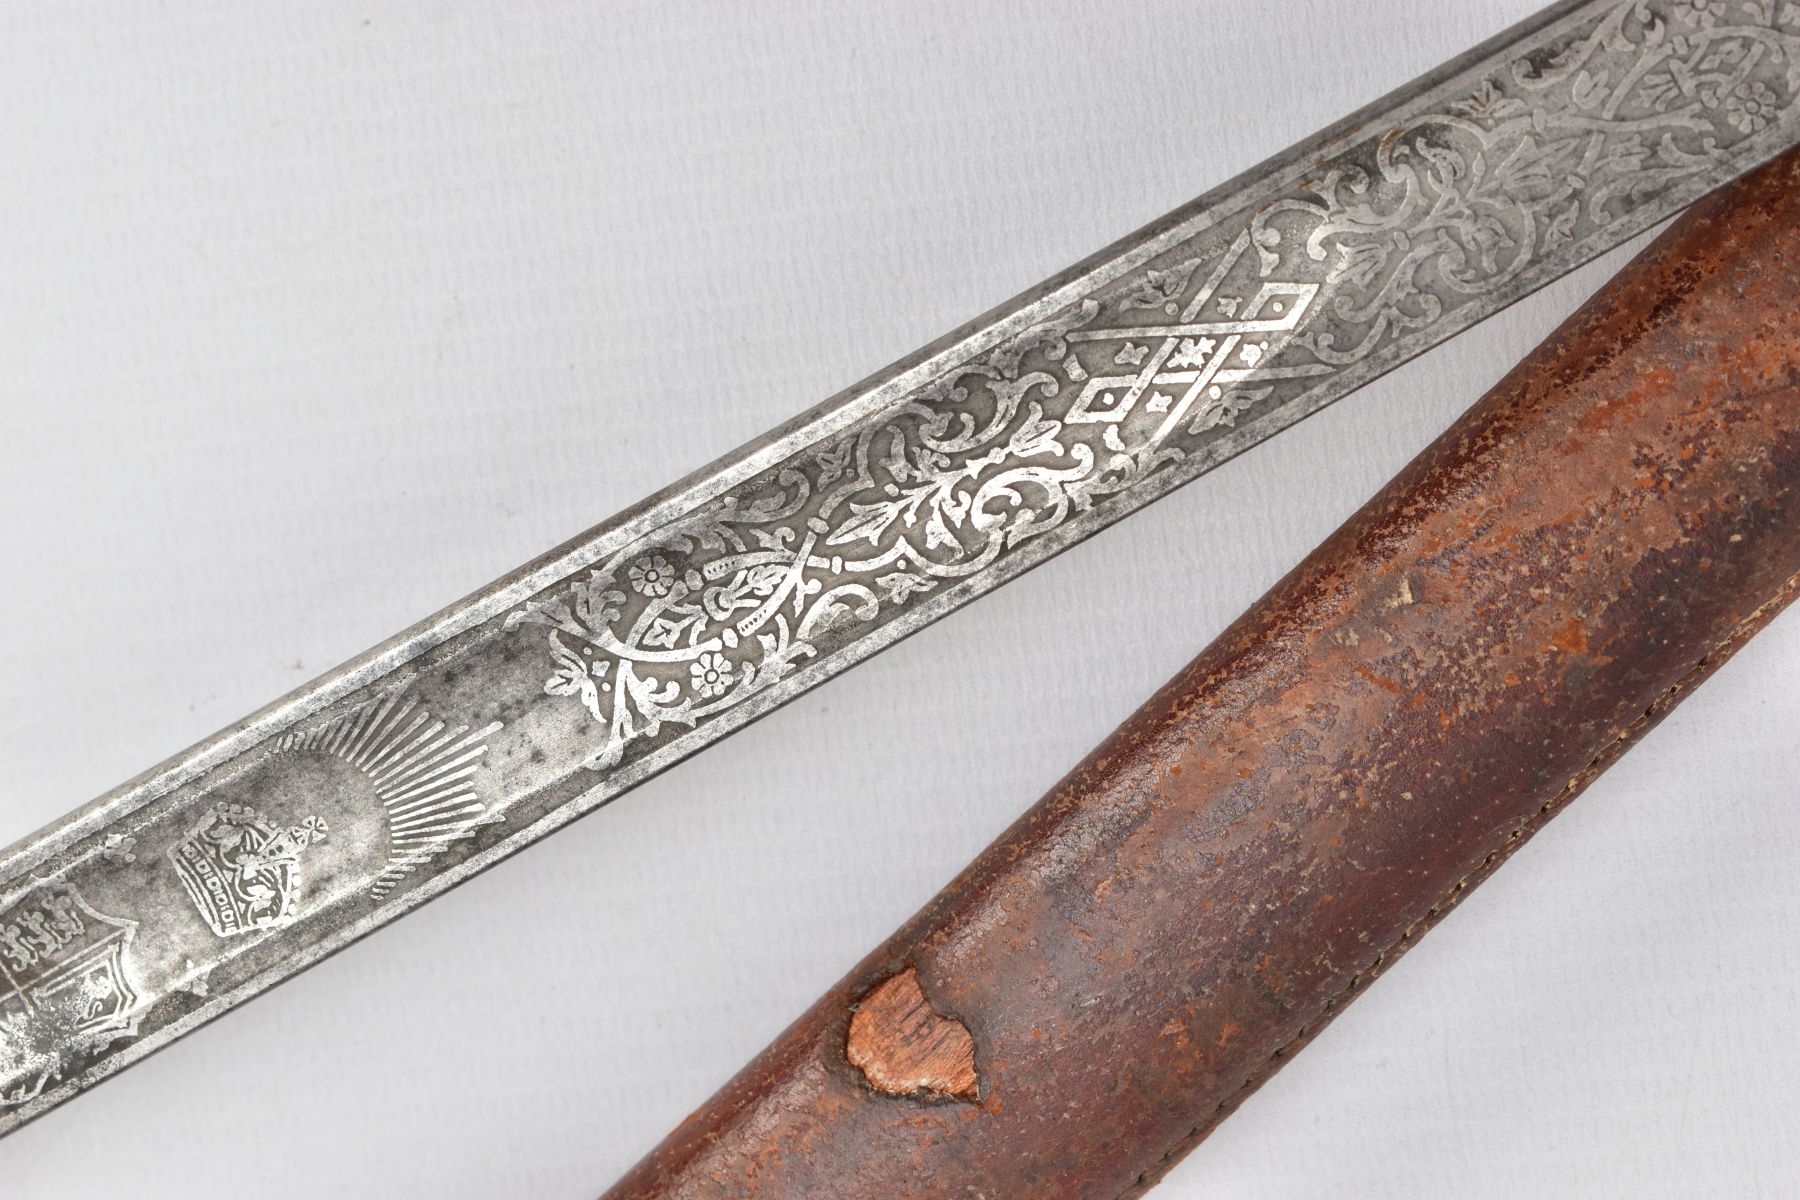 A FENTON BROTHERS LTD, SHEFFIELD 1897 PATTERN INFANTRY OFFICERS SWORD AND SCABBARD, the blade is - Image 3 of 15